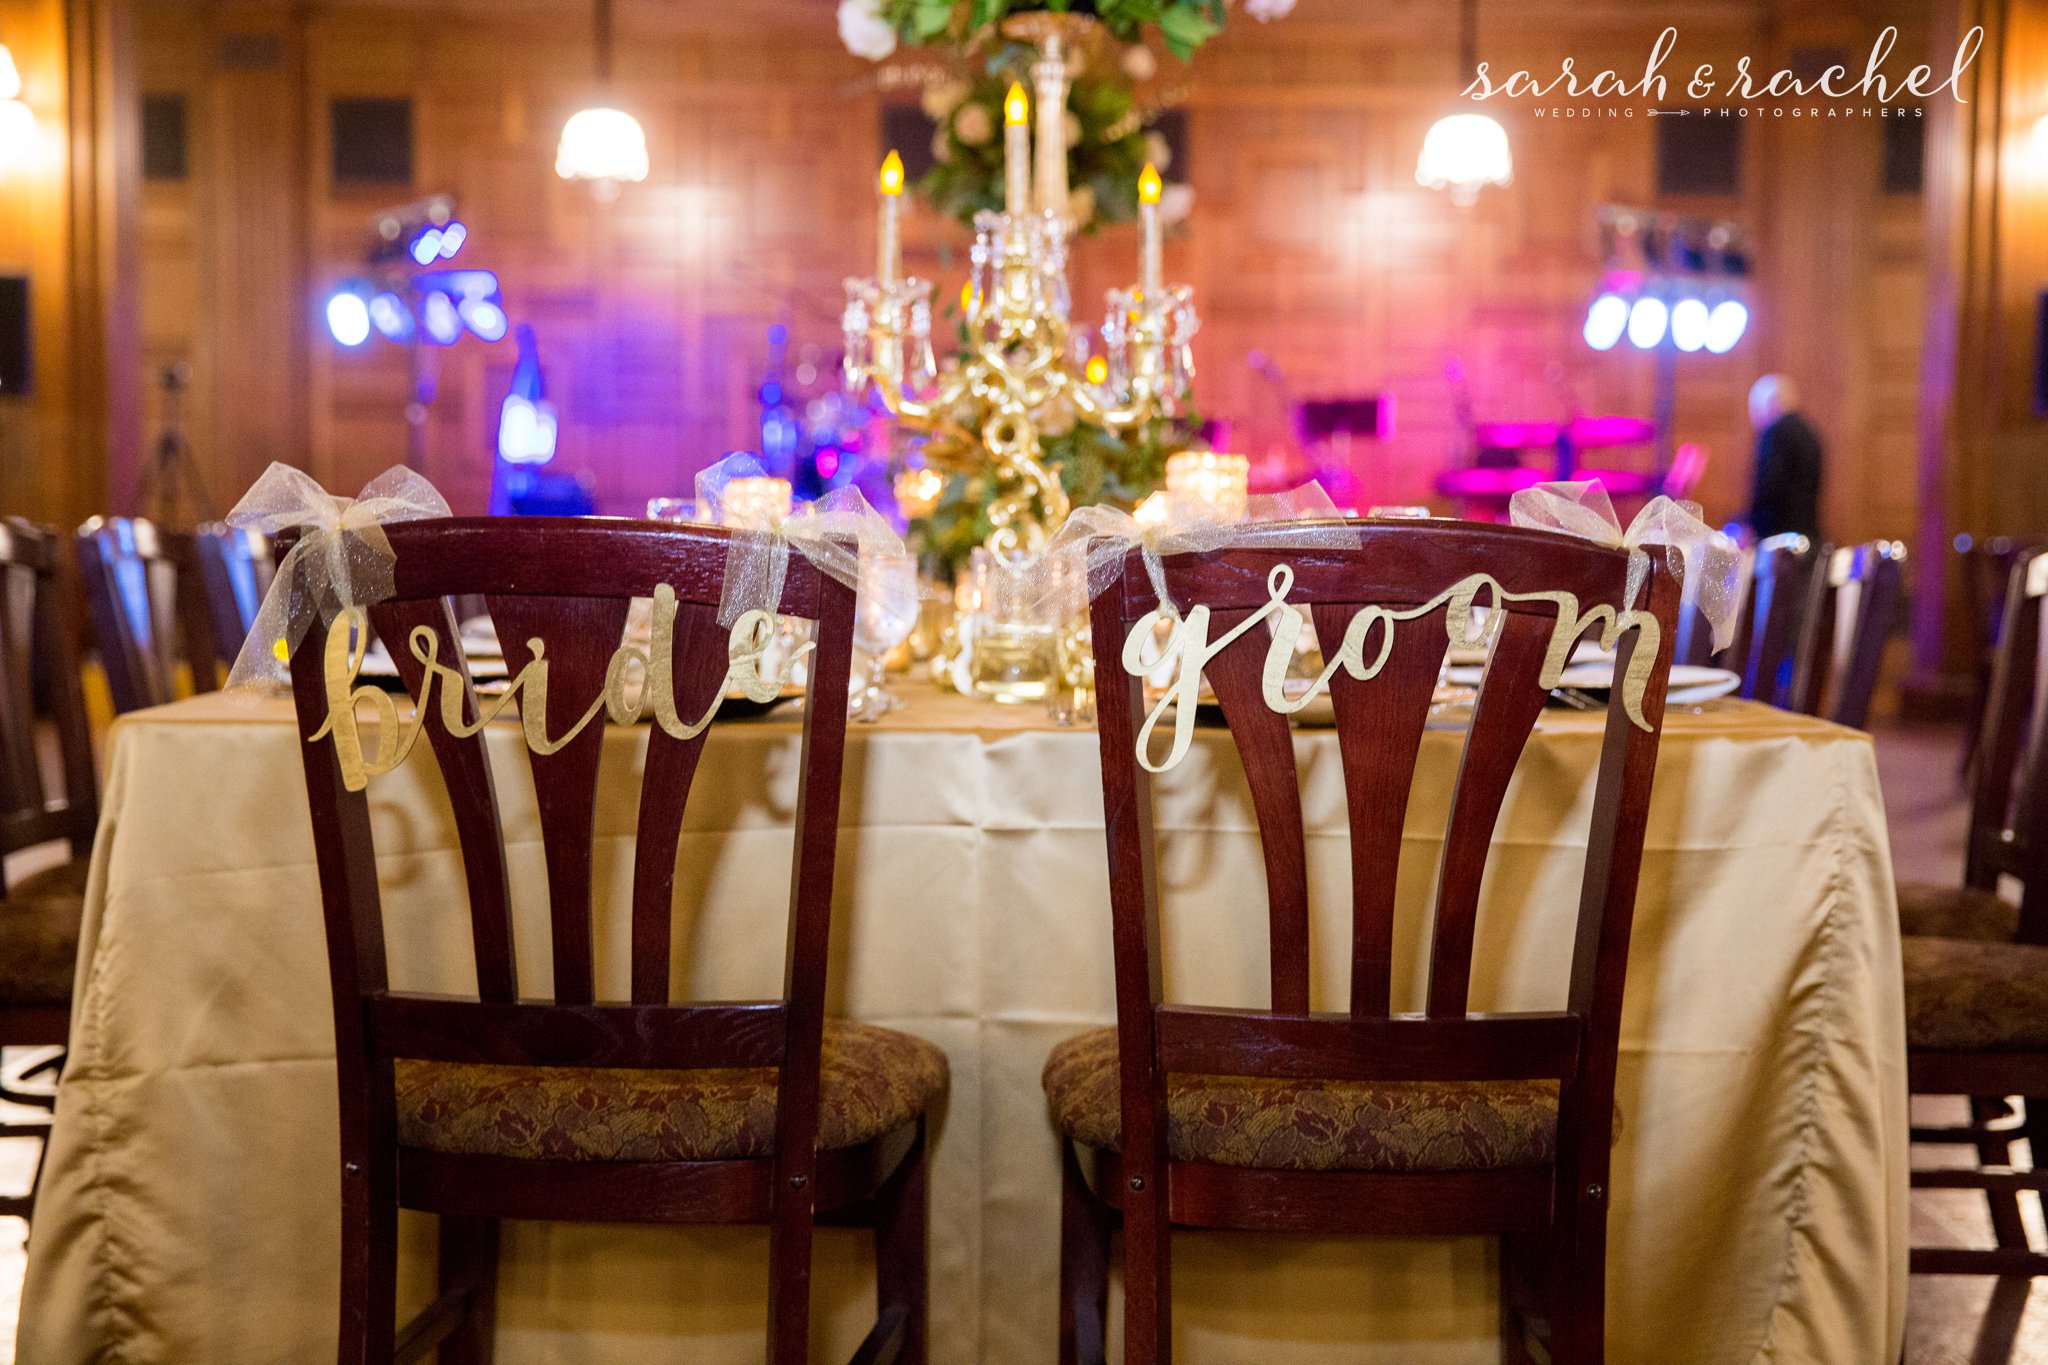 Scottish Rite Cathedral | Gold wedding details | Classy gold wedding | Bride and Groom chair signs